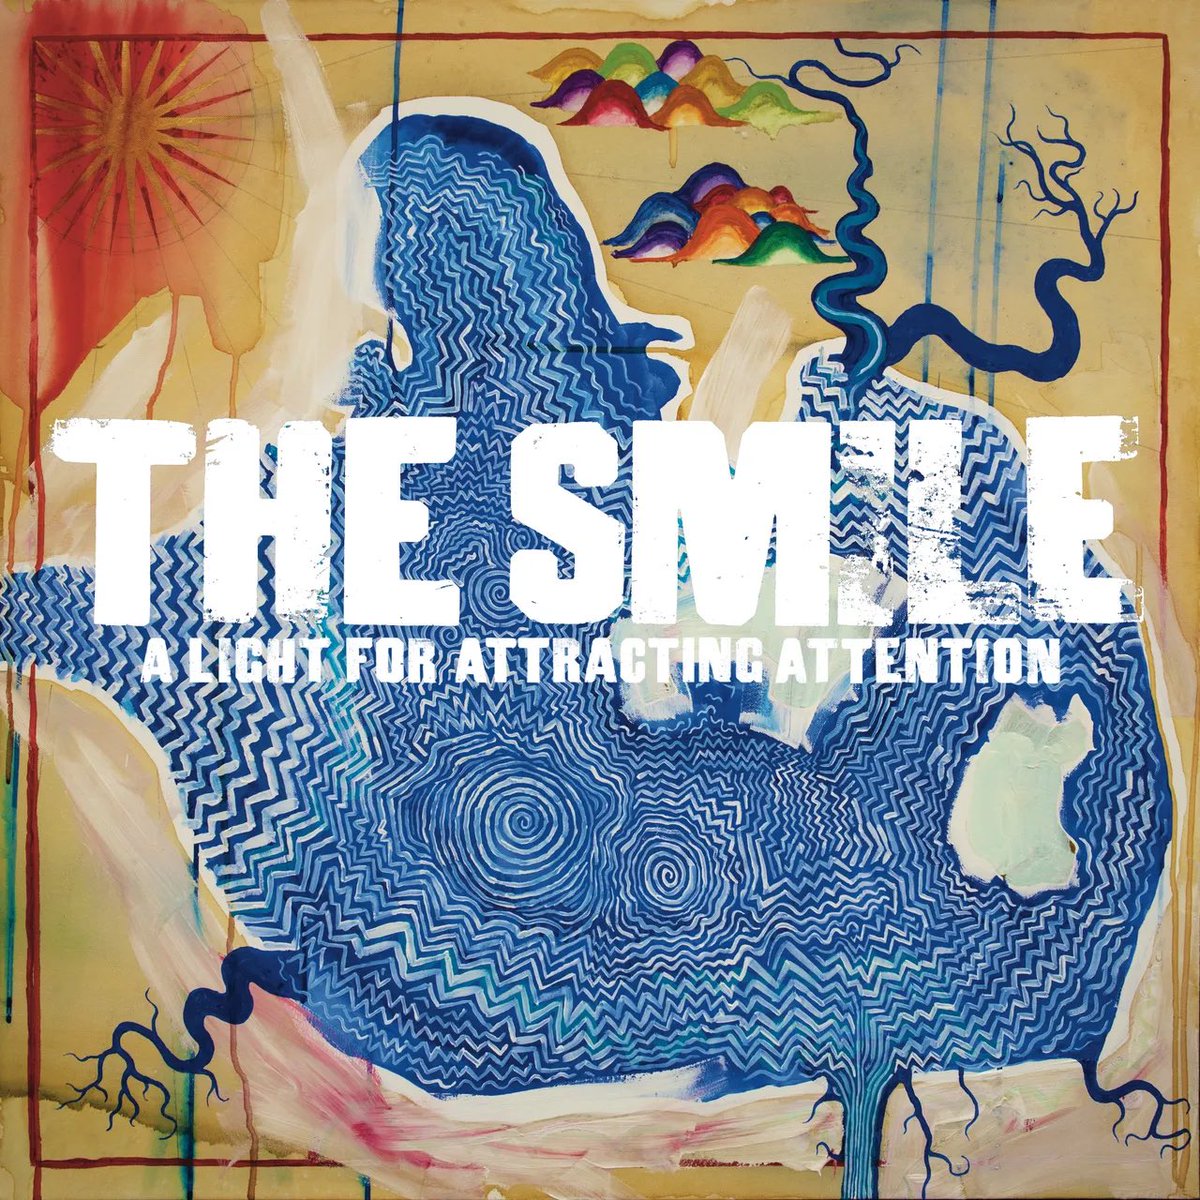 Here’s your Wednesday Smile. Great album.

#thesmile #speechbubbles